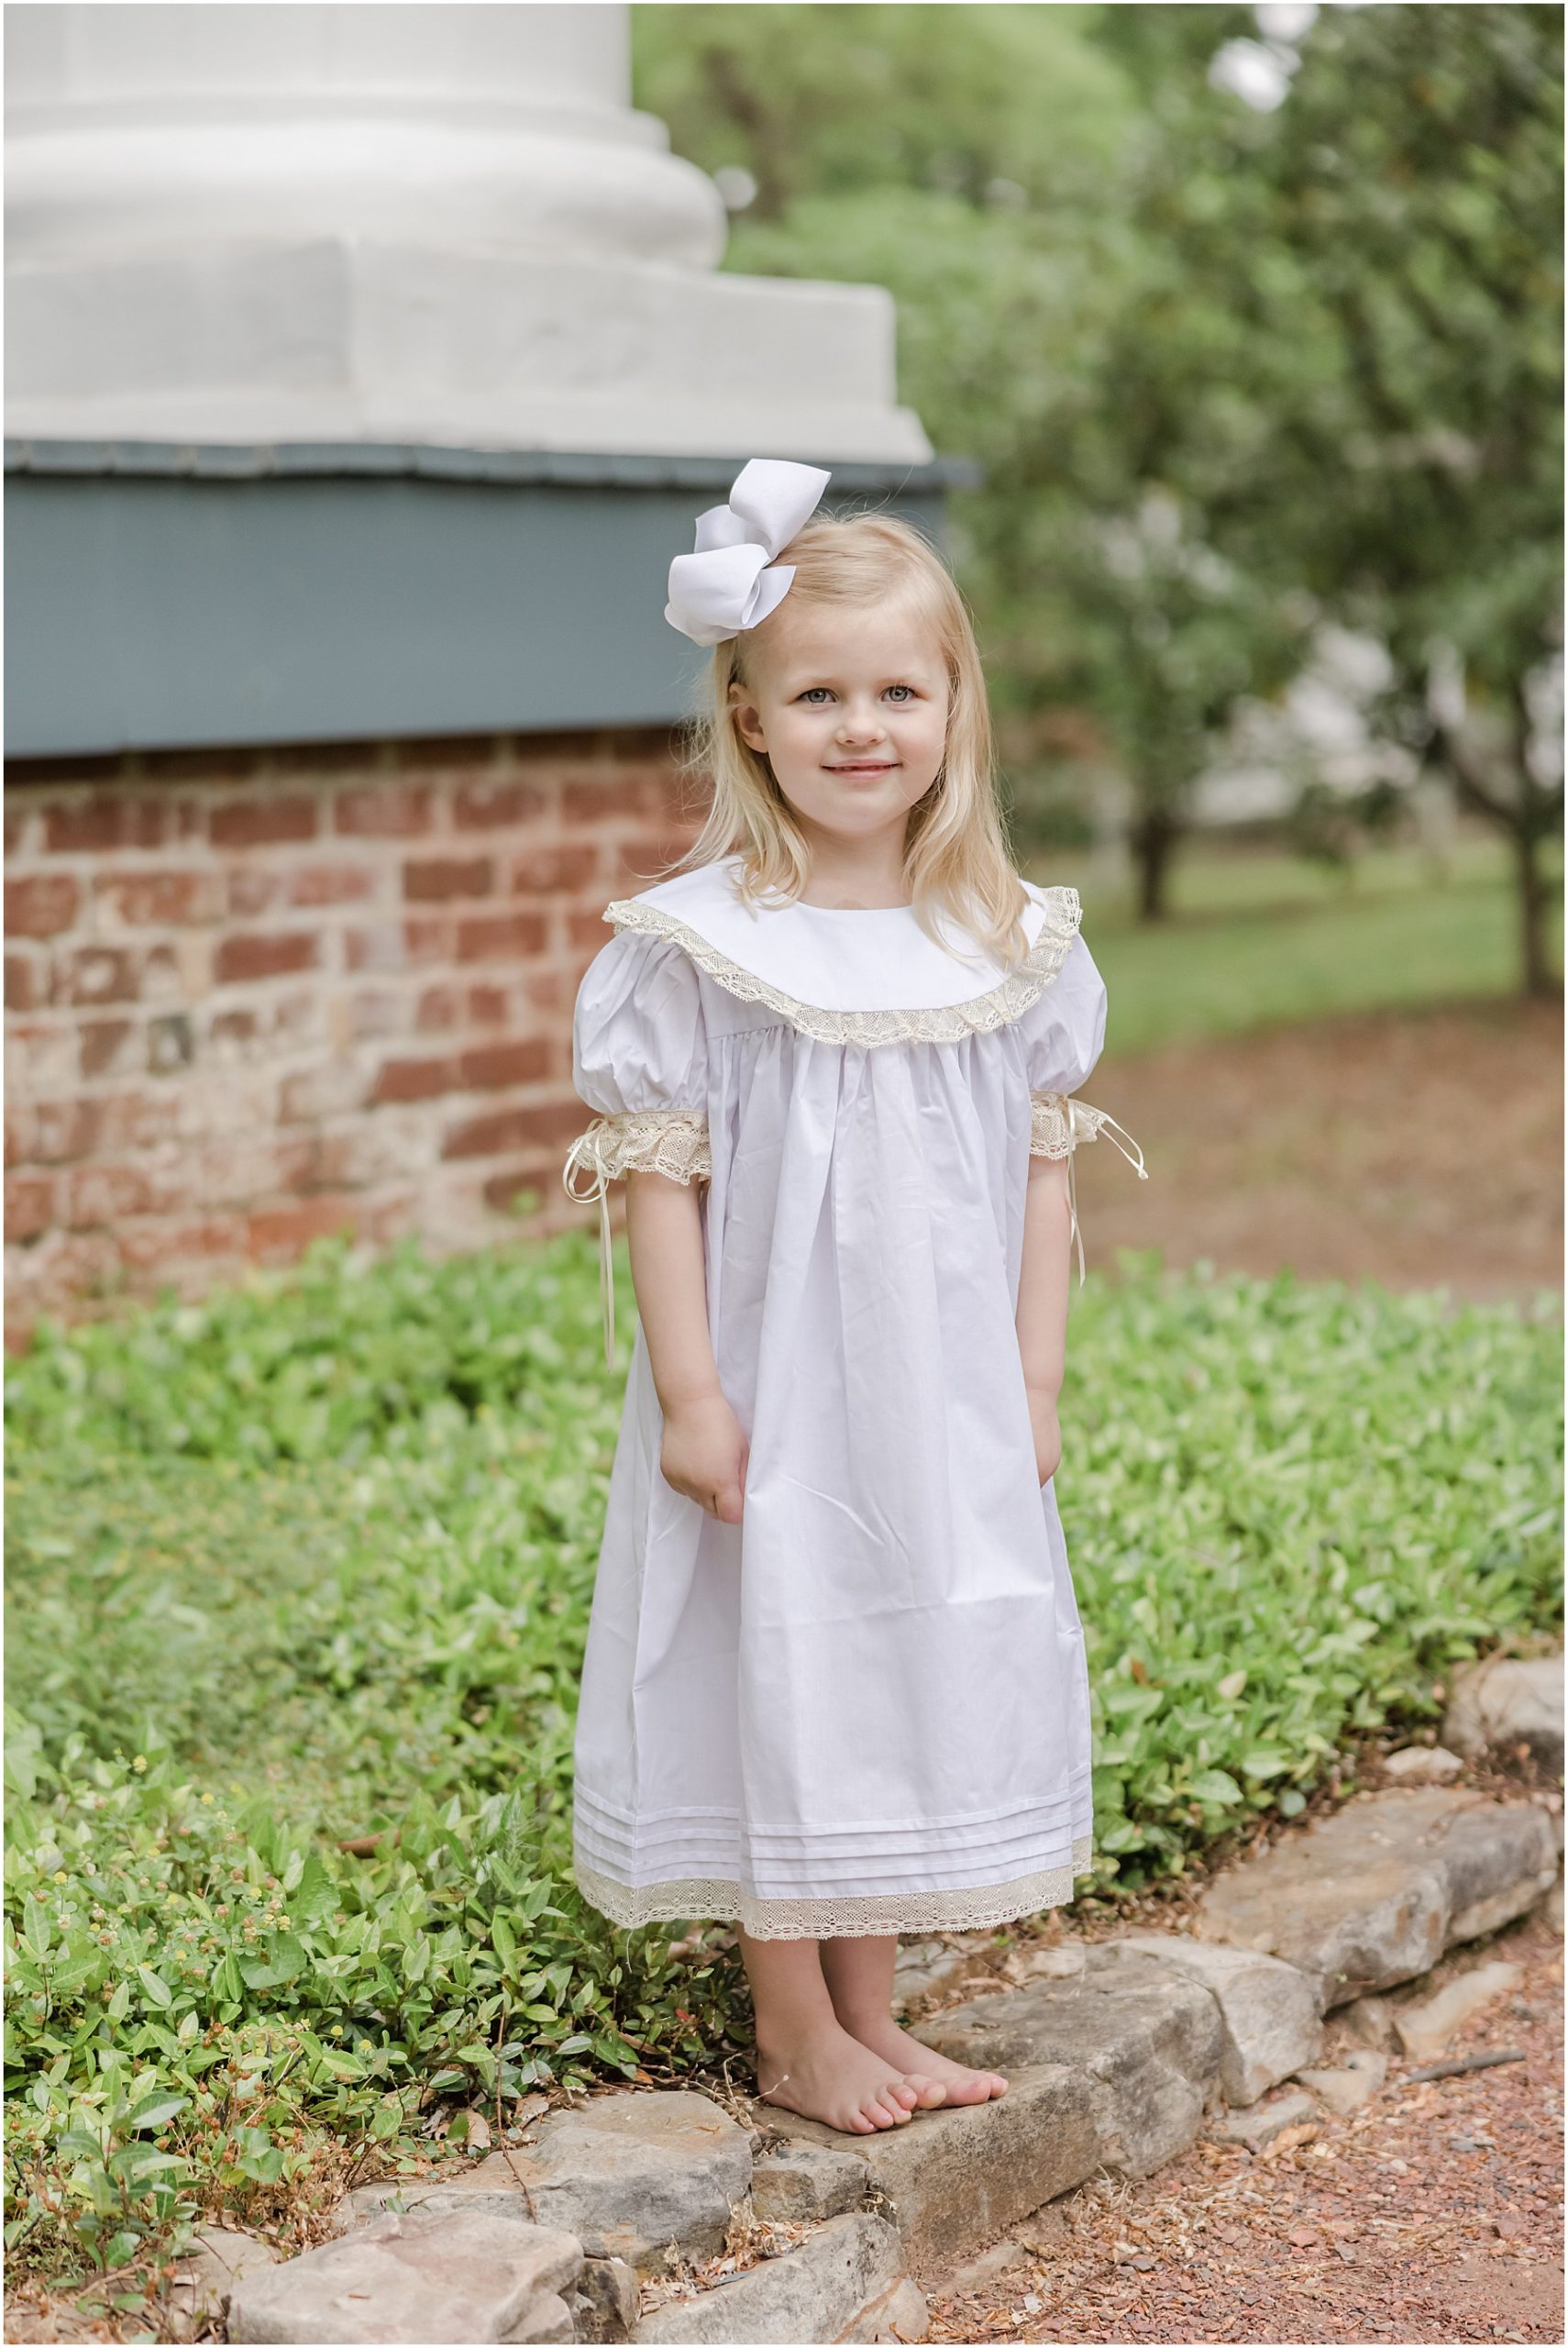 Classic southern portraits in an heirloom dress at Bulloch Hall in Roswell Georgia.